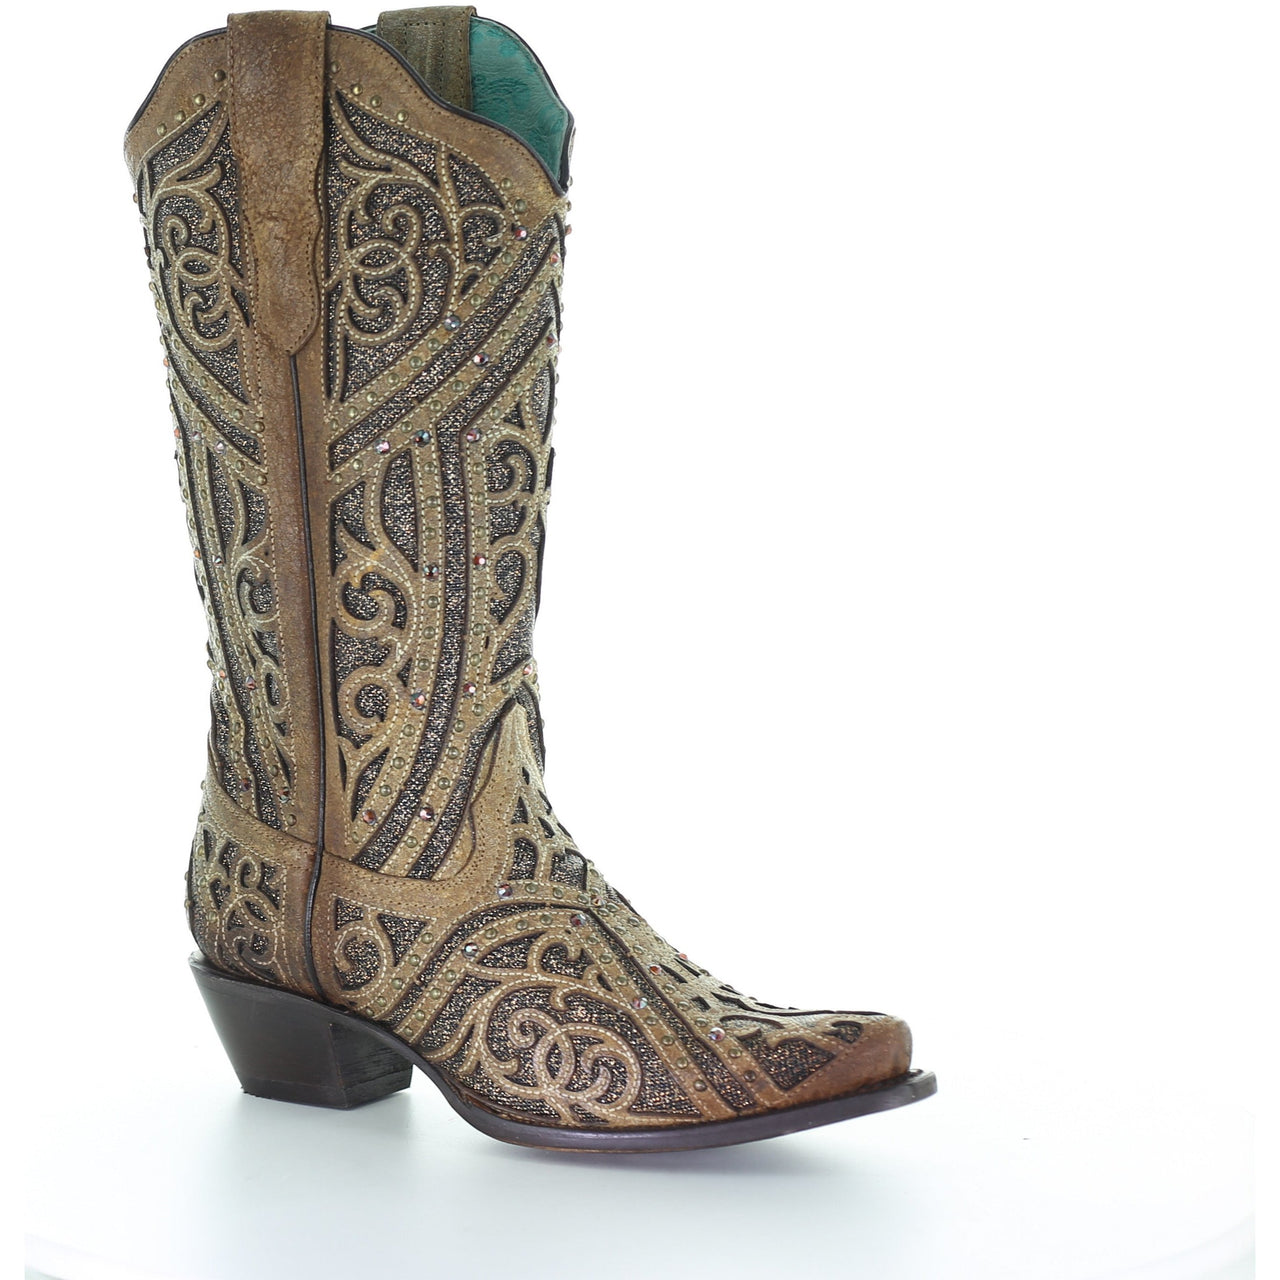 Women's Corral Leather Boots Handcrafted Straw - yeehawcowboy